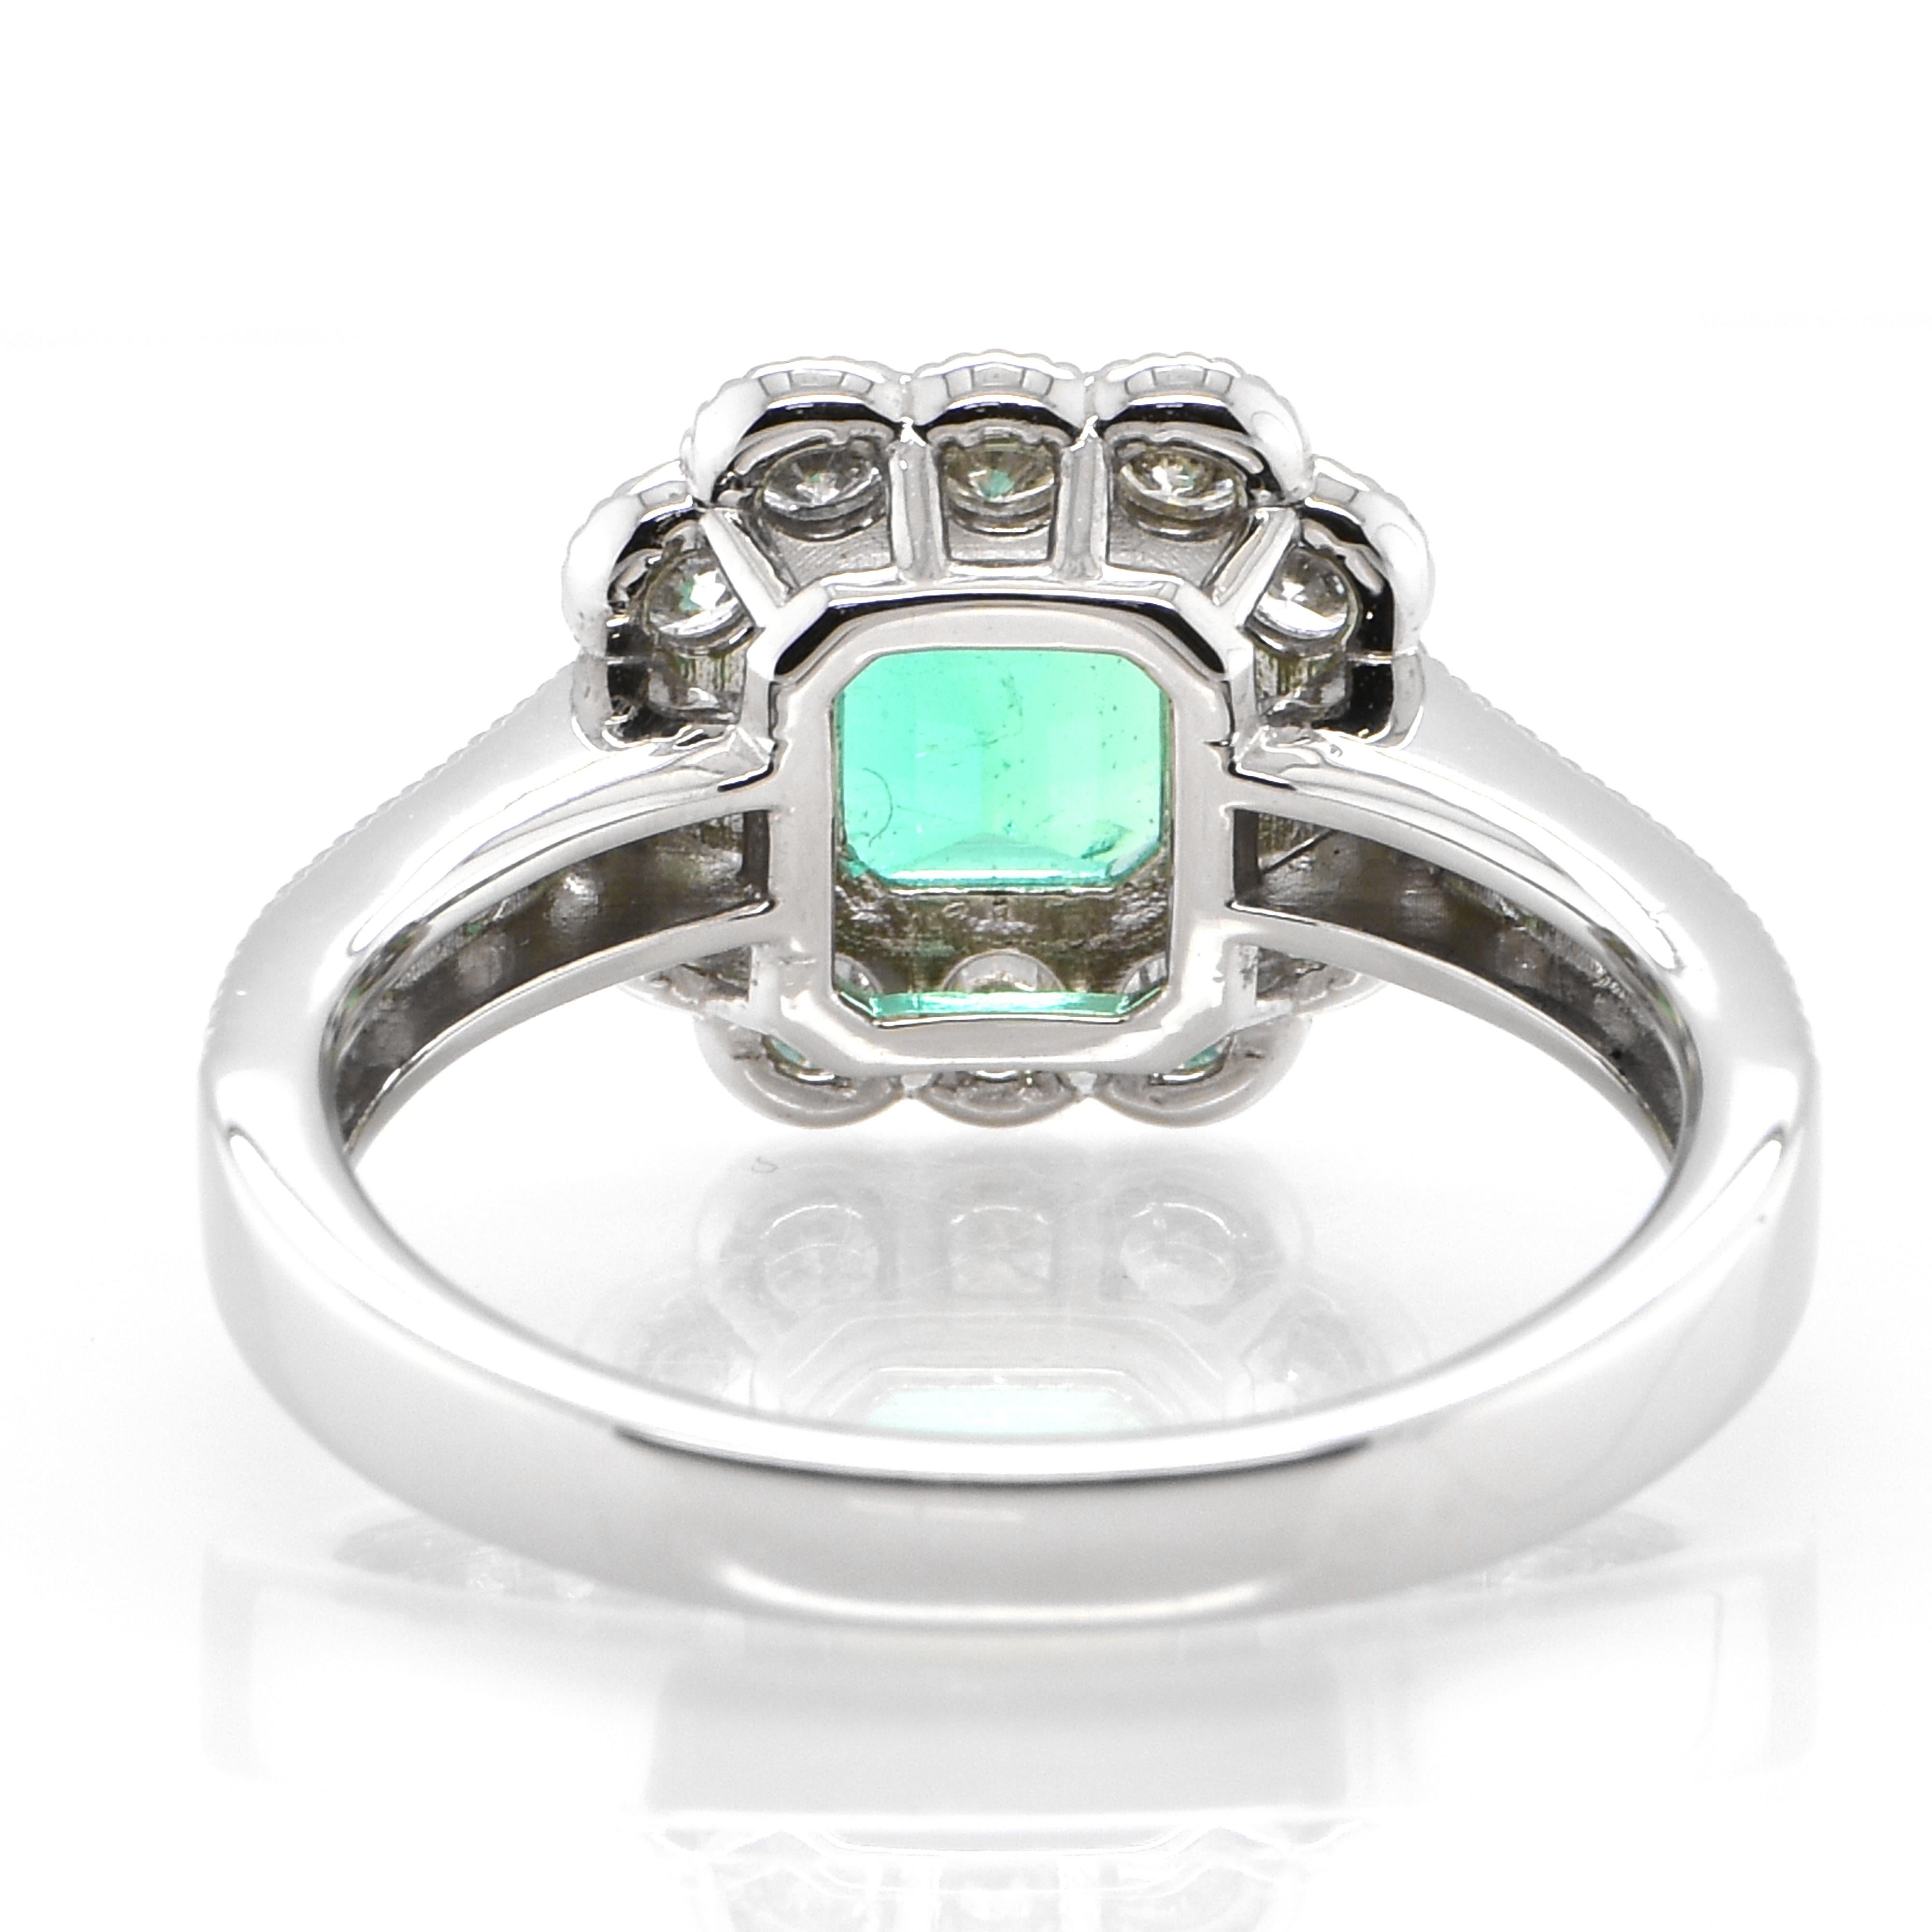 Women's 1.15 Carat Natural Colombian Emerald and Diamond Ring Set in Platinum For Sale